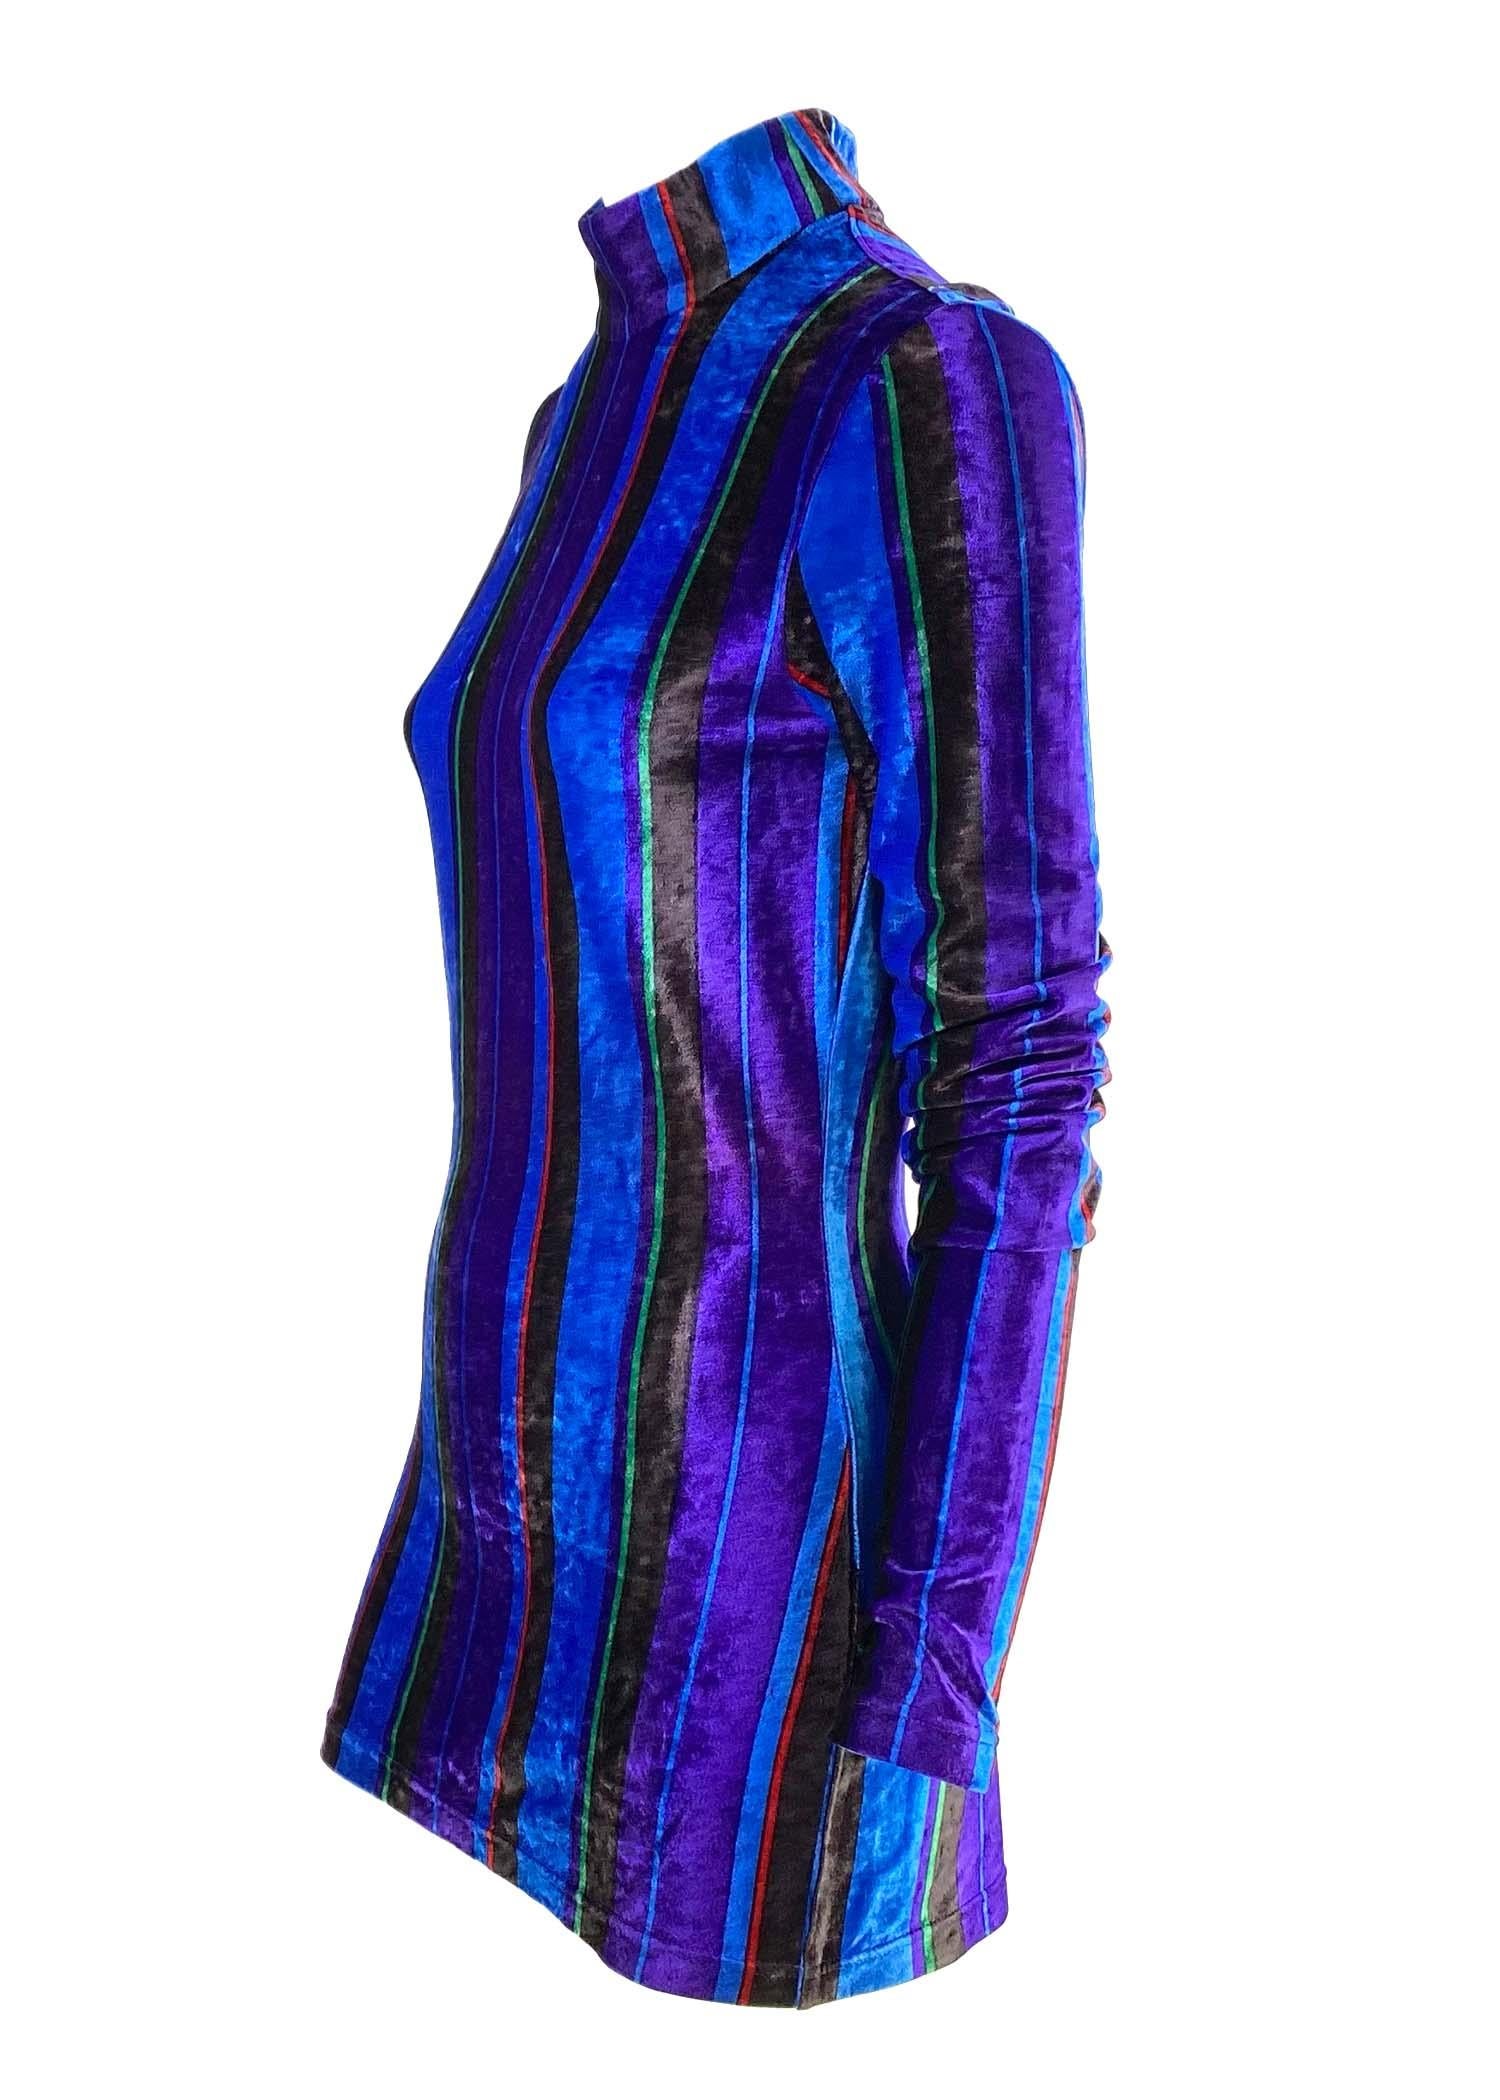 F/W 1993 Gianni Versace Couture Blue Purple Green Red Stripe Velvet Mini Dress In Excellent Condition For Sale In West Hollywood, CA